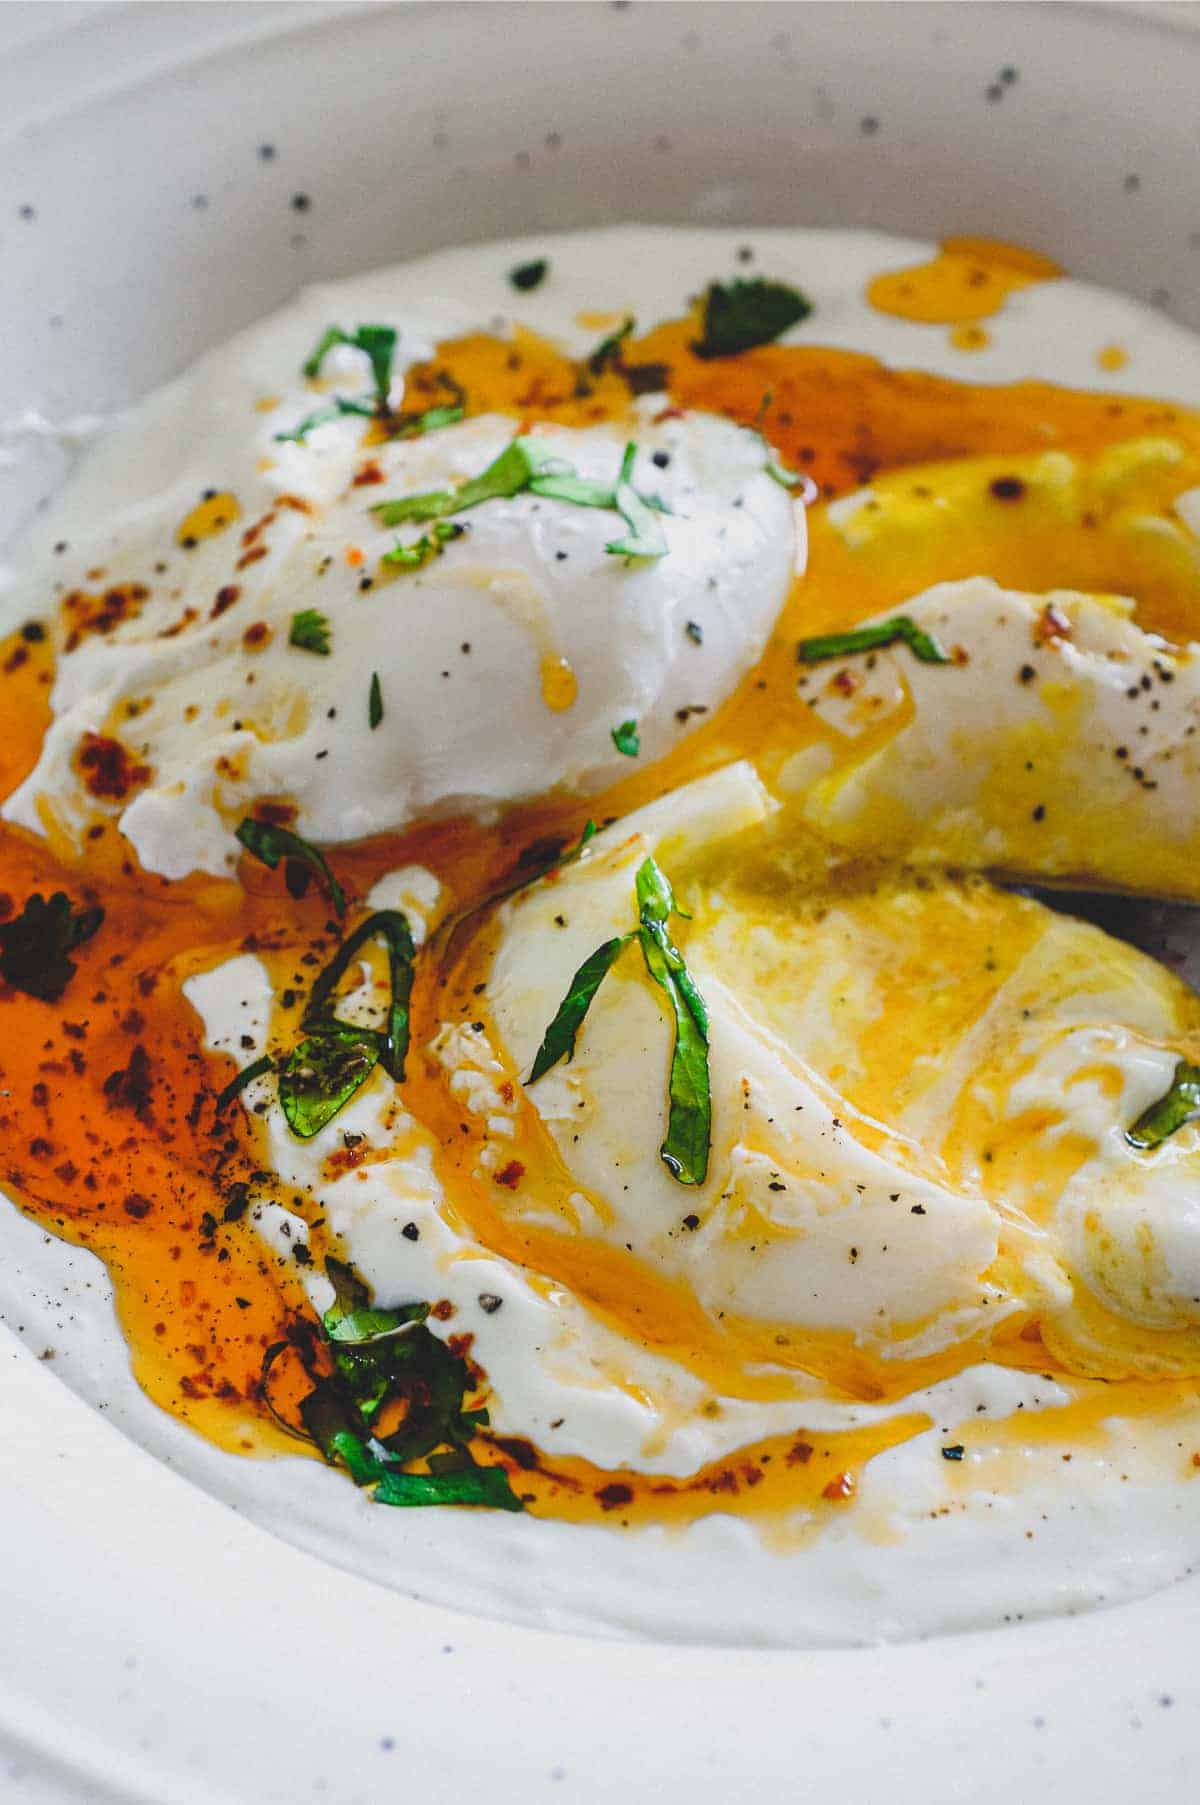 A small bowl of Turkish Cilbir (poached eggs) drizzled in orange Aleppo pepper butter